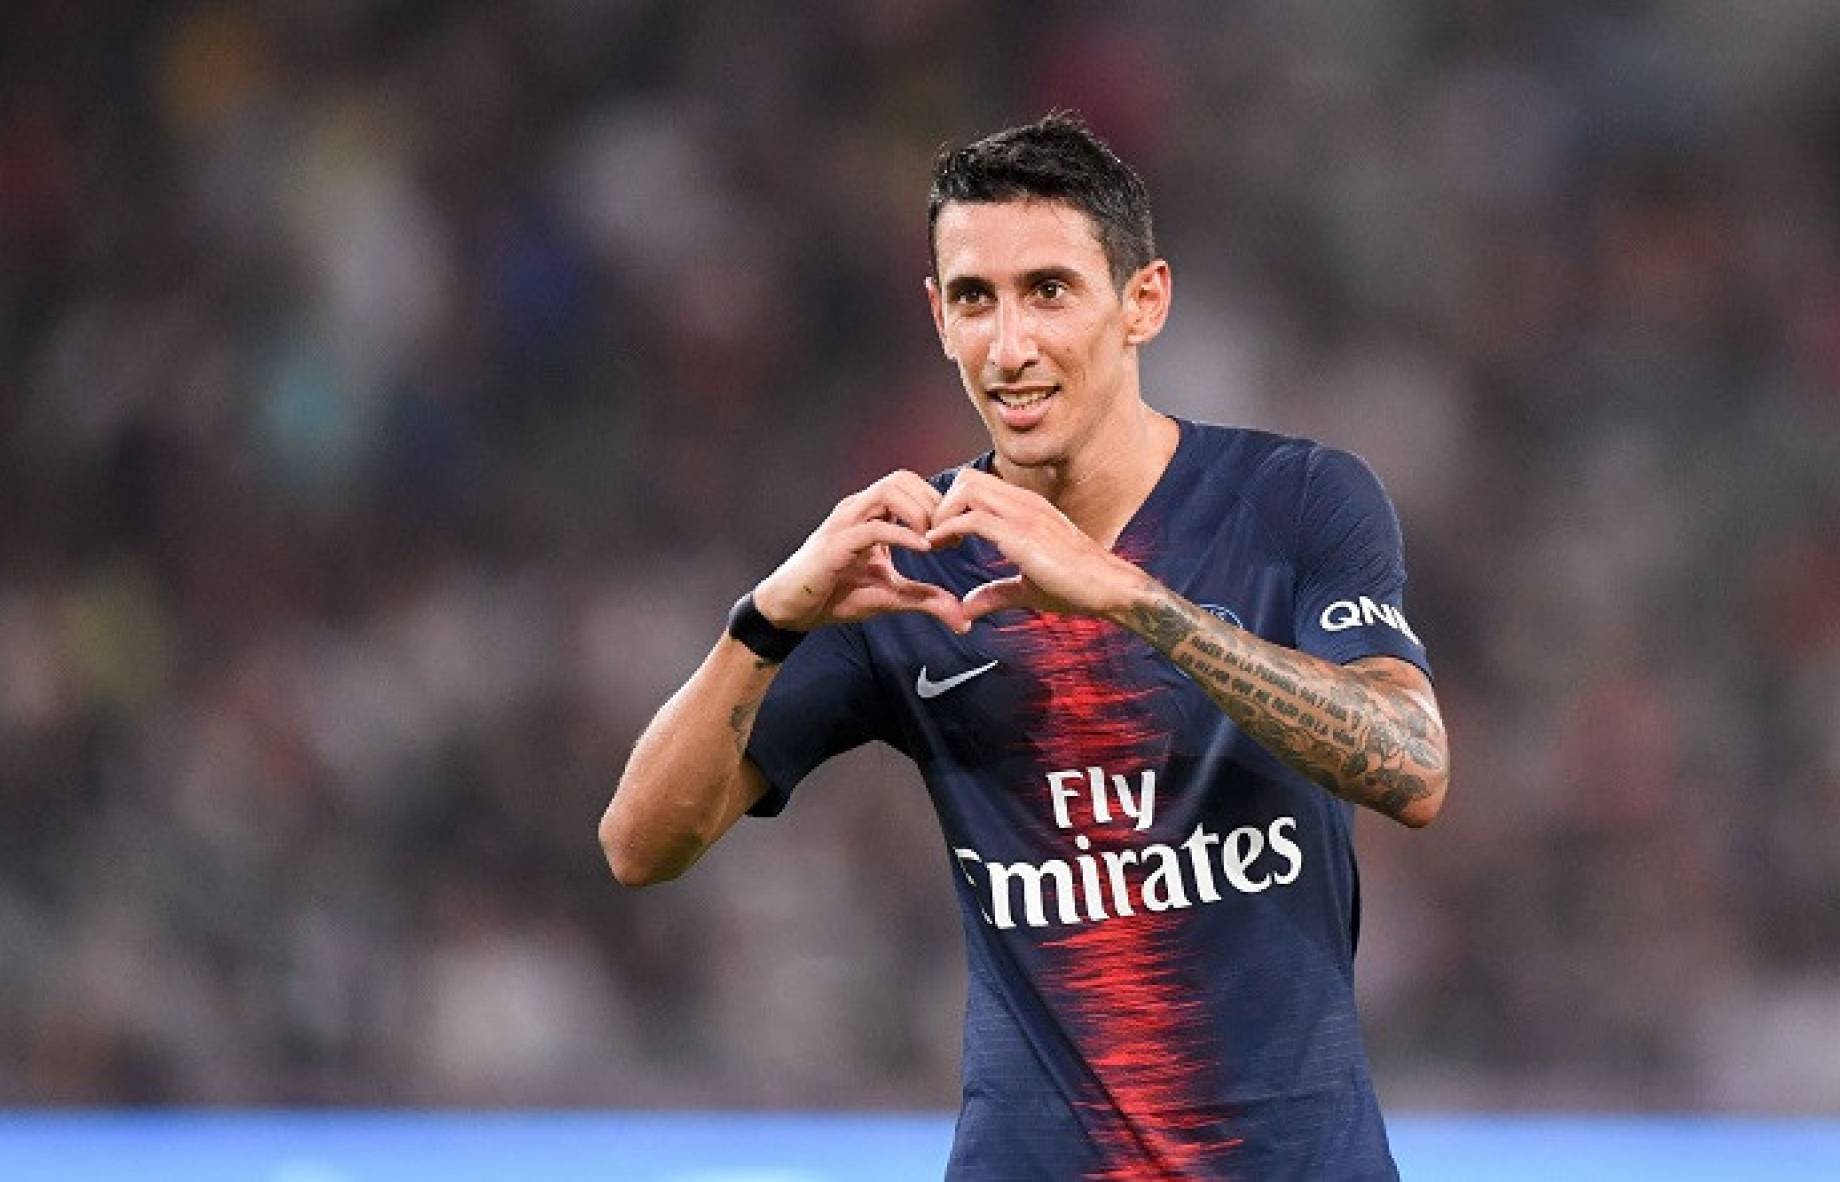 Di Maria Psg  PSG star Di Maria handed fourmatch ban for trying to